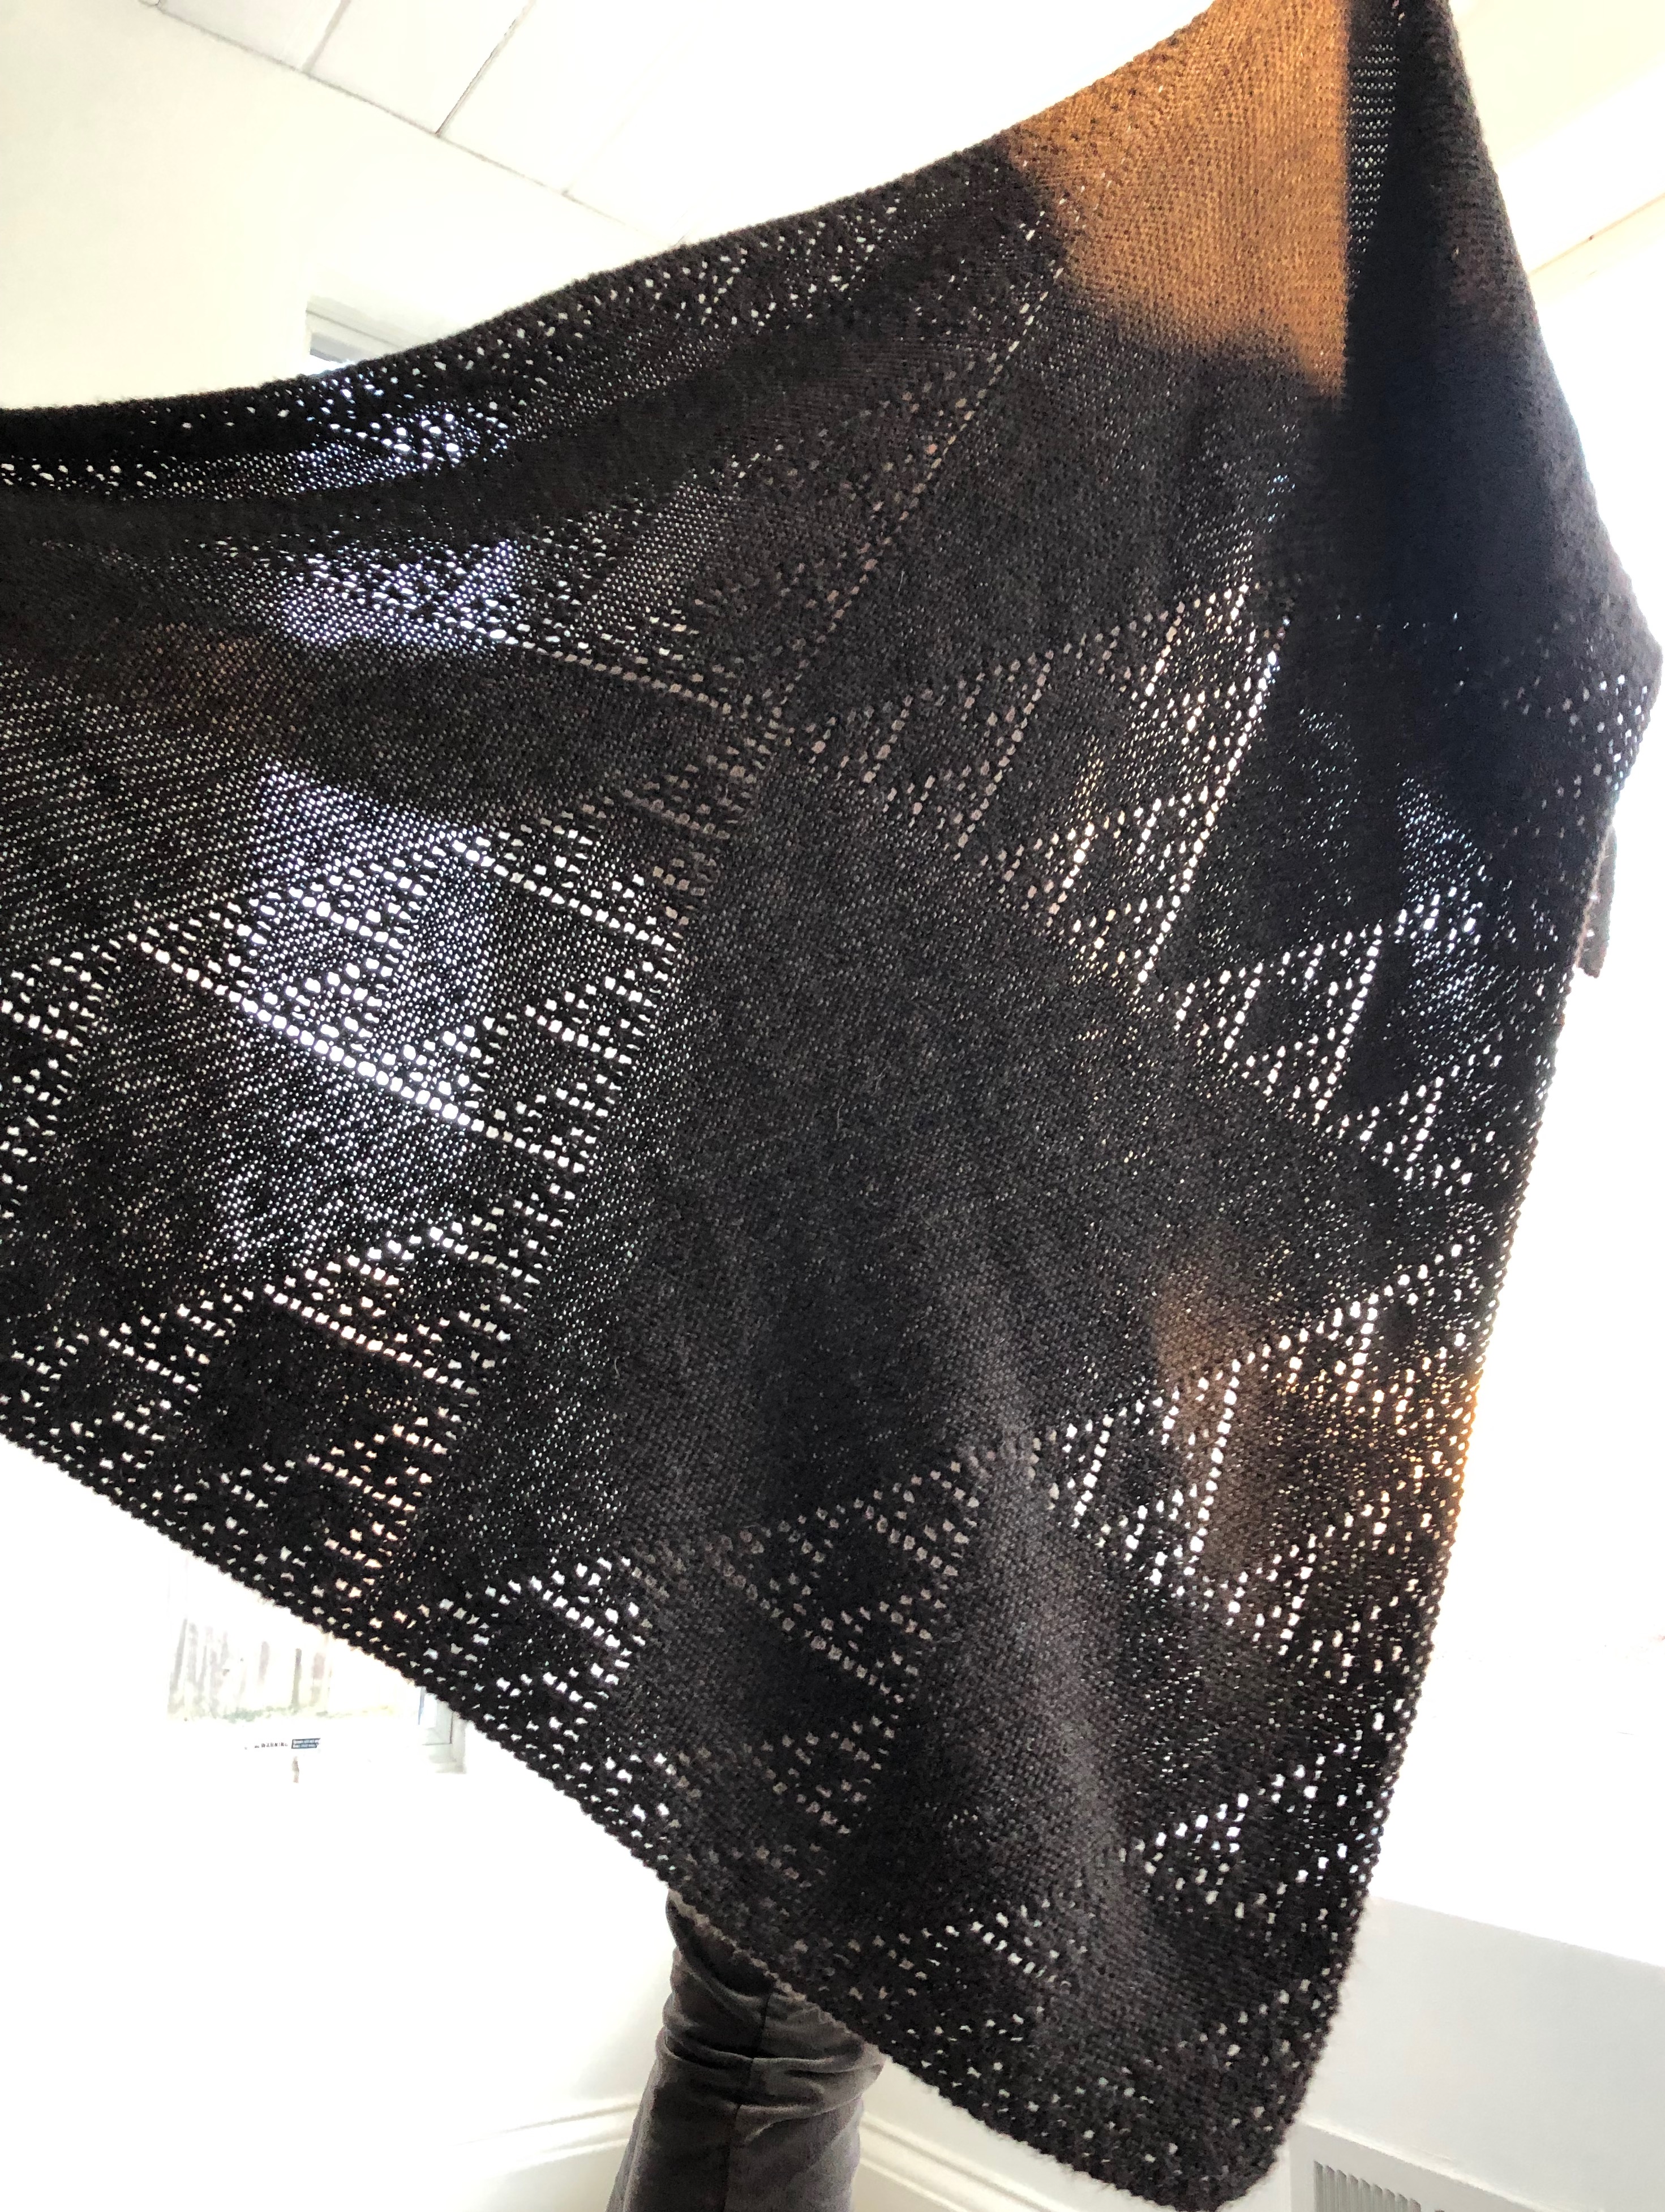 A shawl knitted according to the rule of Pascal's triangle mod 2, by brienne brown